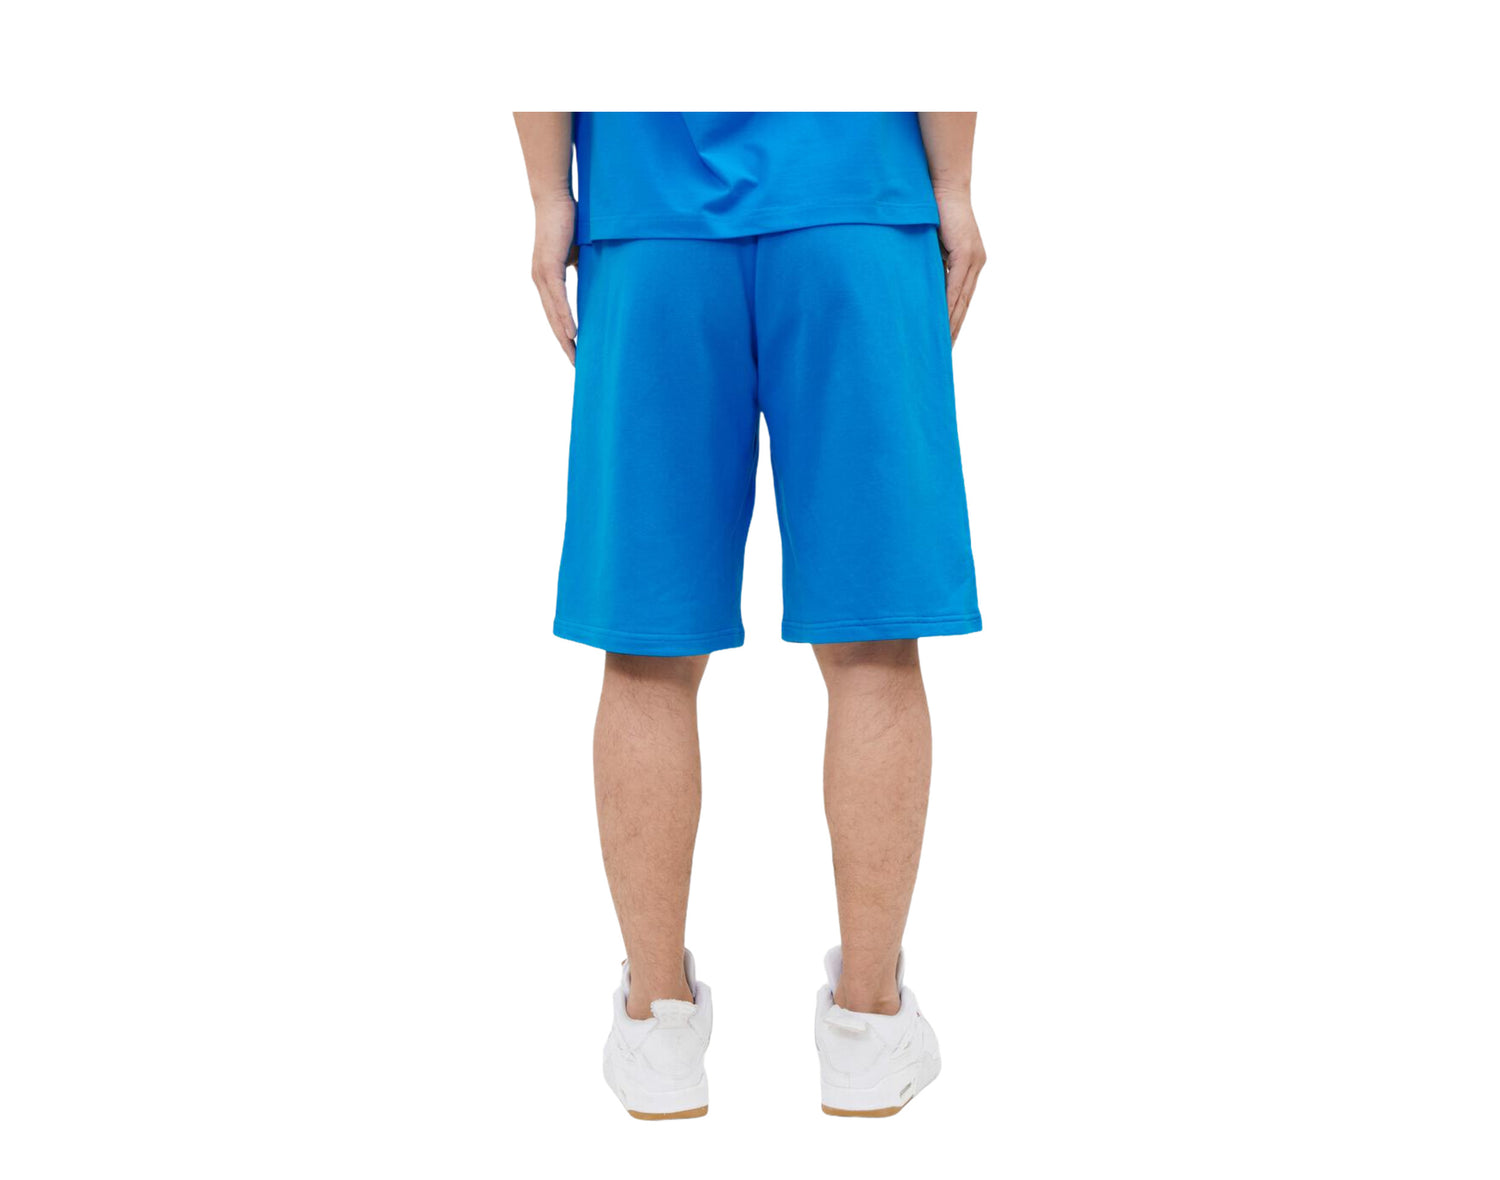 Freeze Max Space Jam 2 - A New Legacy Men's Shorts